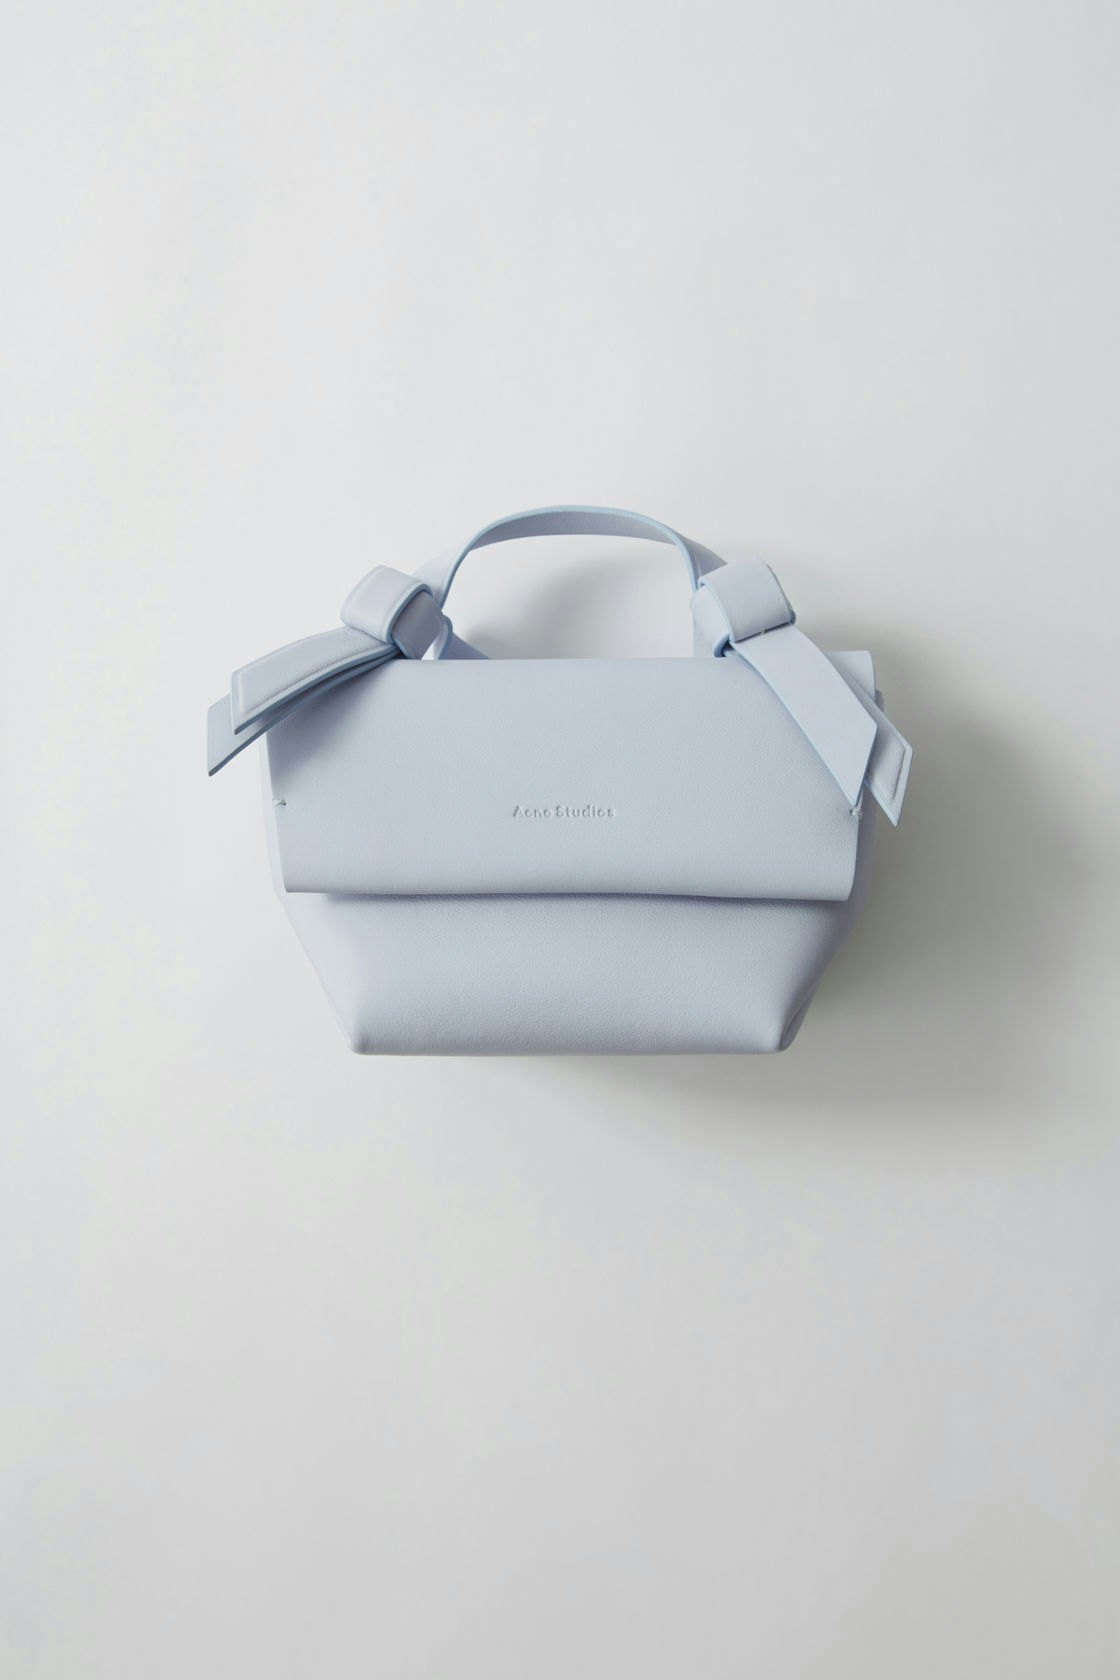 Acne Studios' Musubi Bag Is Getting An Update Featuring One Of